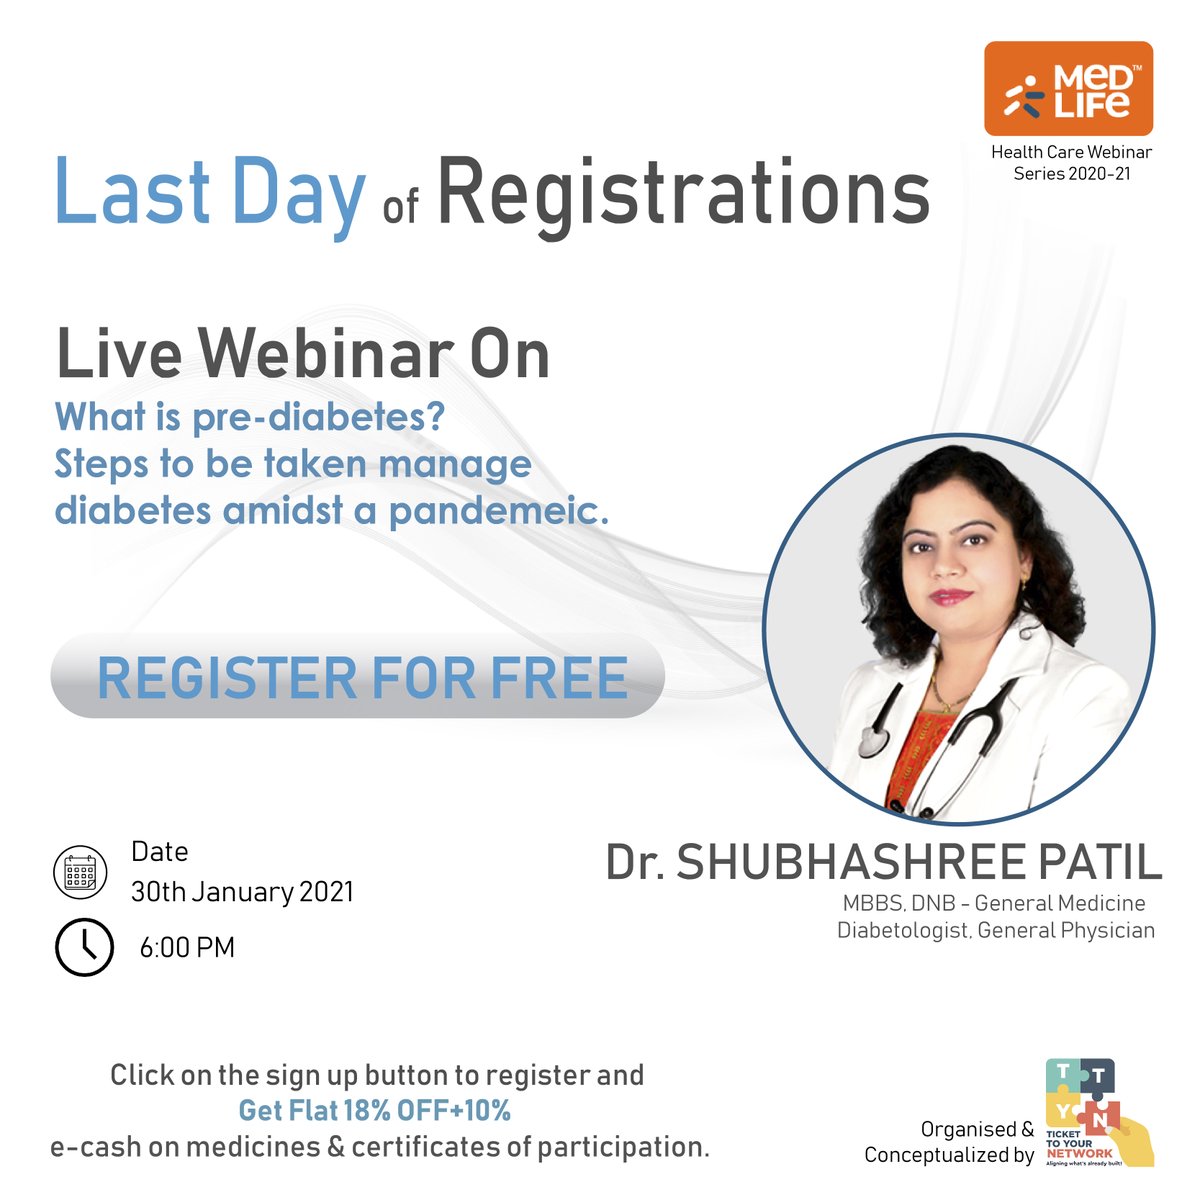 Watch Dr. Shubhashree Patil (MBBS, DNB - General Medicine, Diploma in Diabetology) explain care to be taken amidst a pandemic for diabetic patients. Last day for the registration for the #livewebinar on 30th January 2021: bit.ly/3ov5nGP #Medlife @connectwithttyn